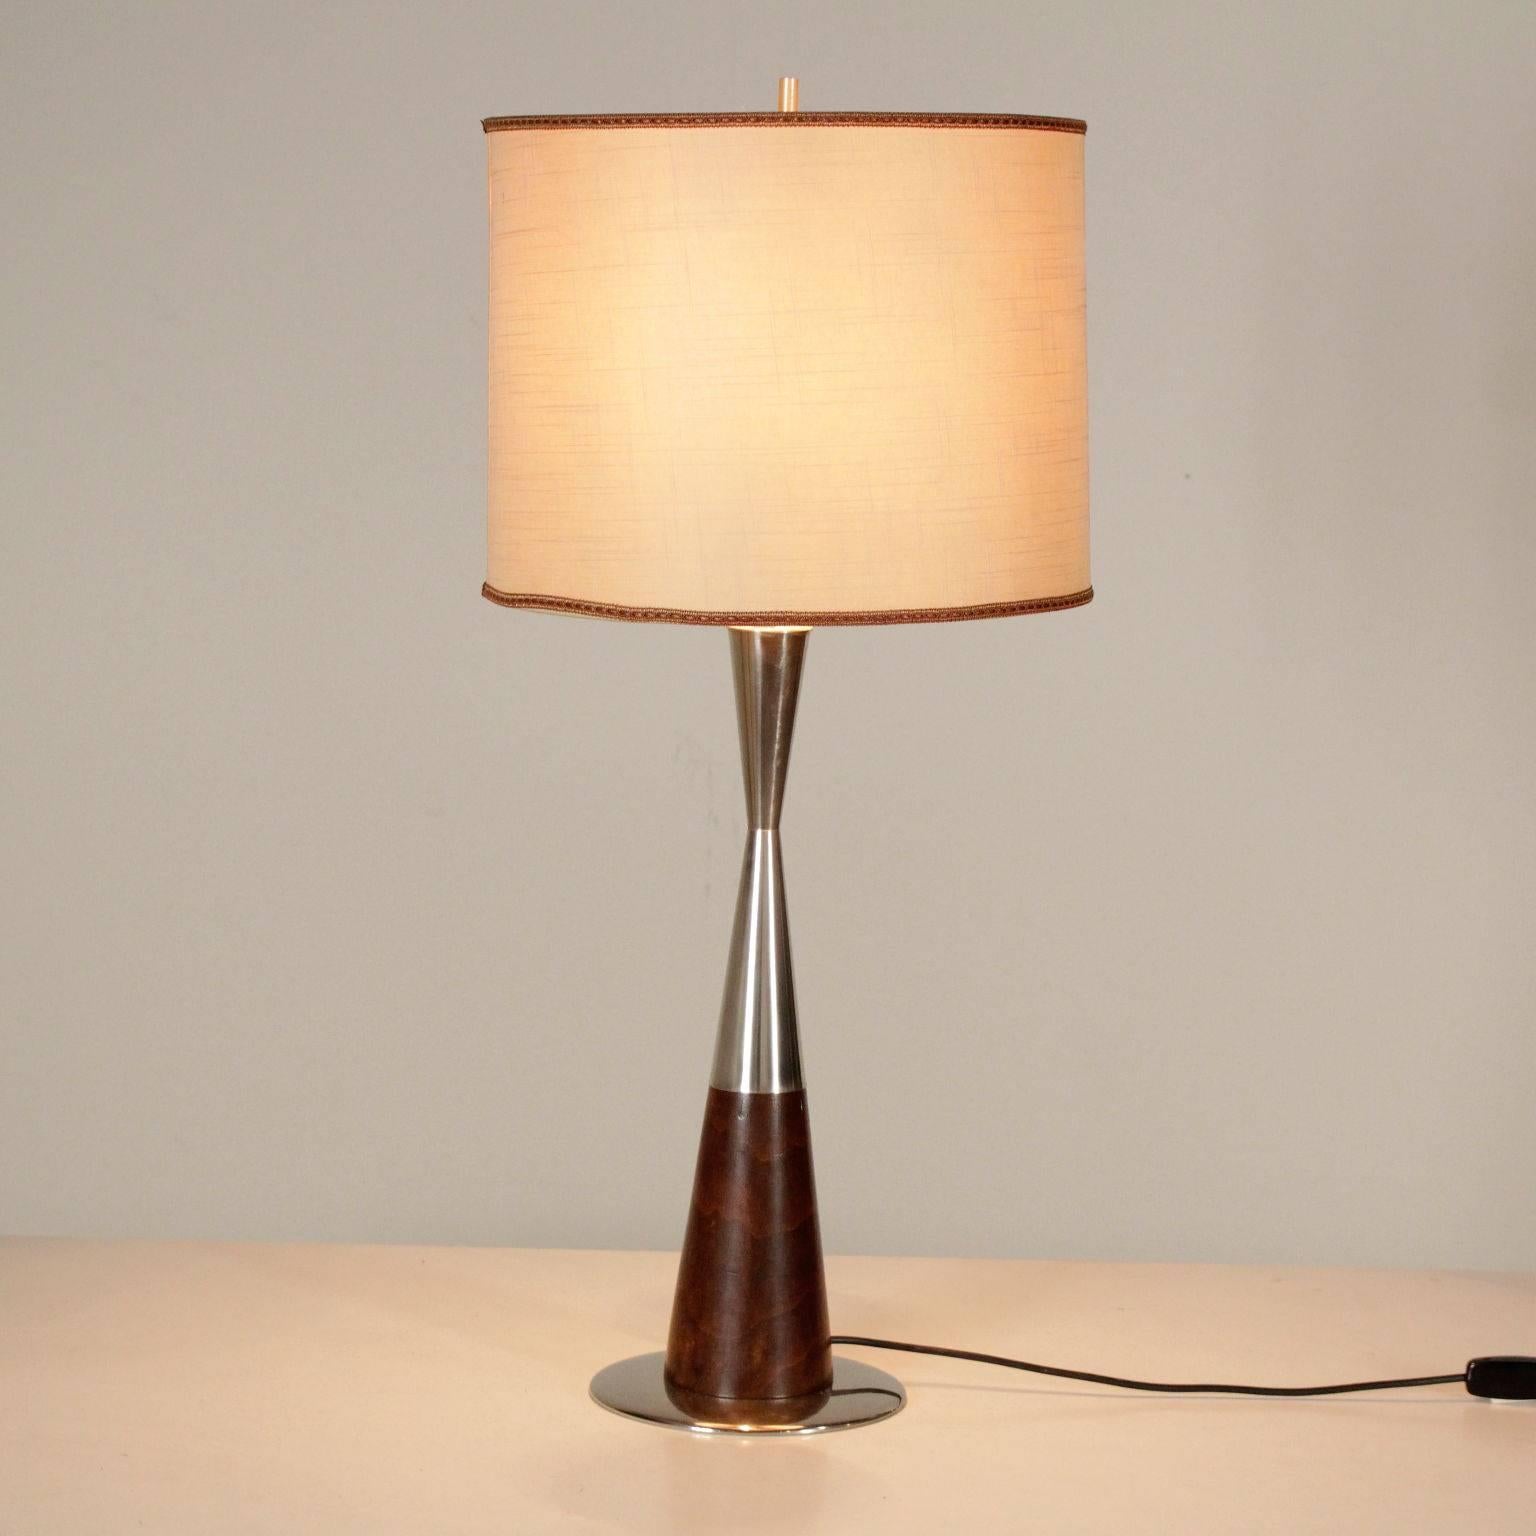 A table lamp, wood, chromed aluminium and fabric lampshade. Manufactured in Italy, 1950s.